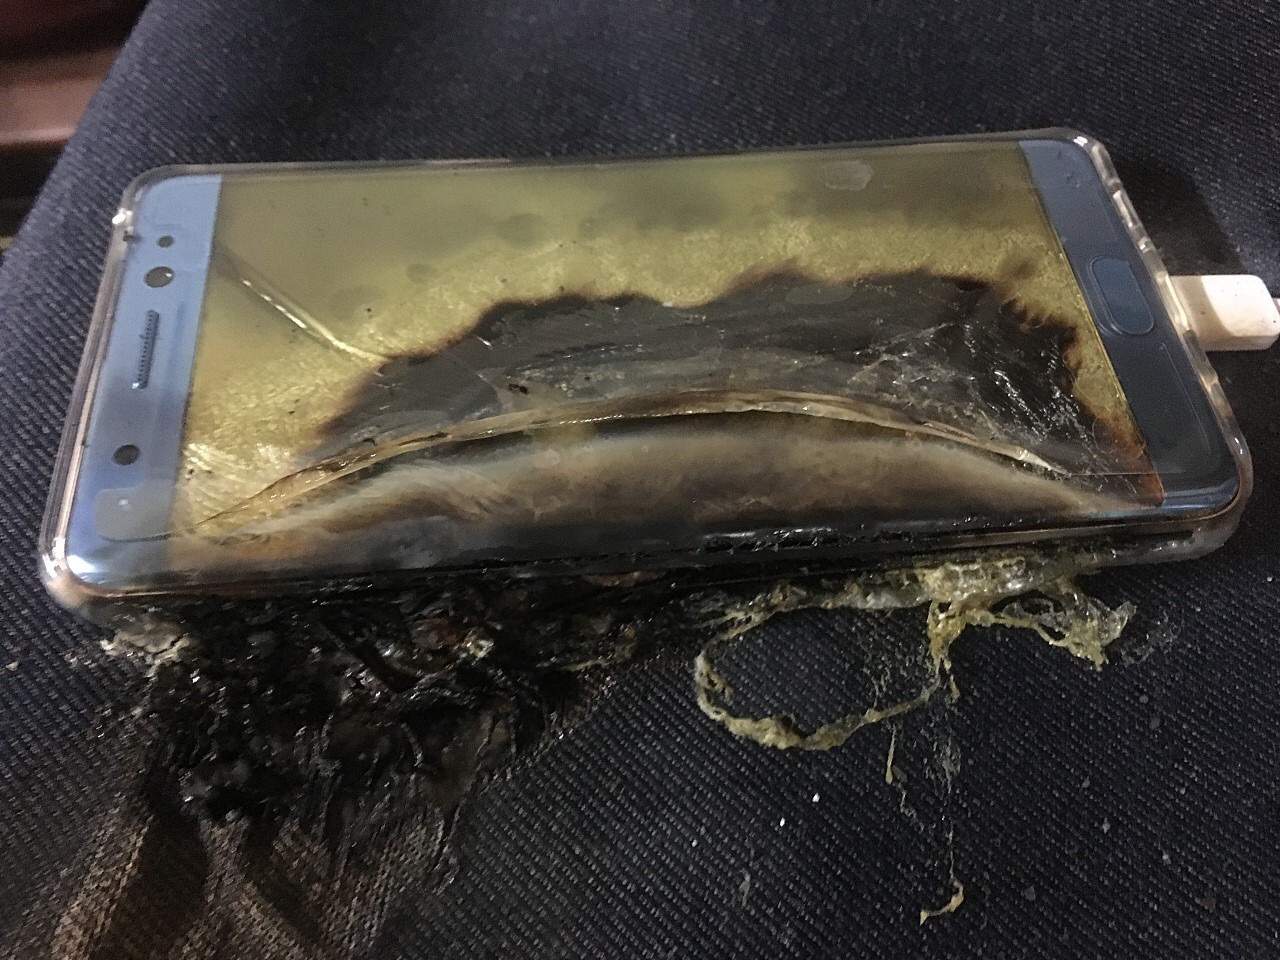 Galaxy Note 7 shipments halted. Handsets pulled from sale